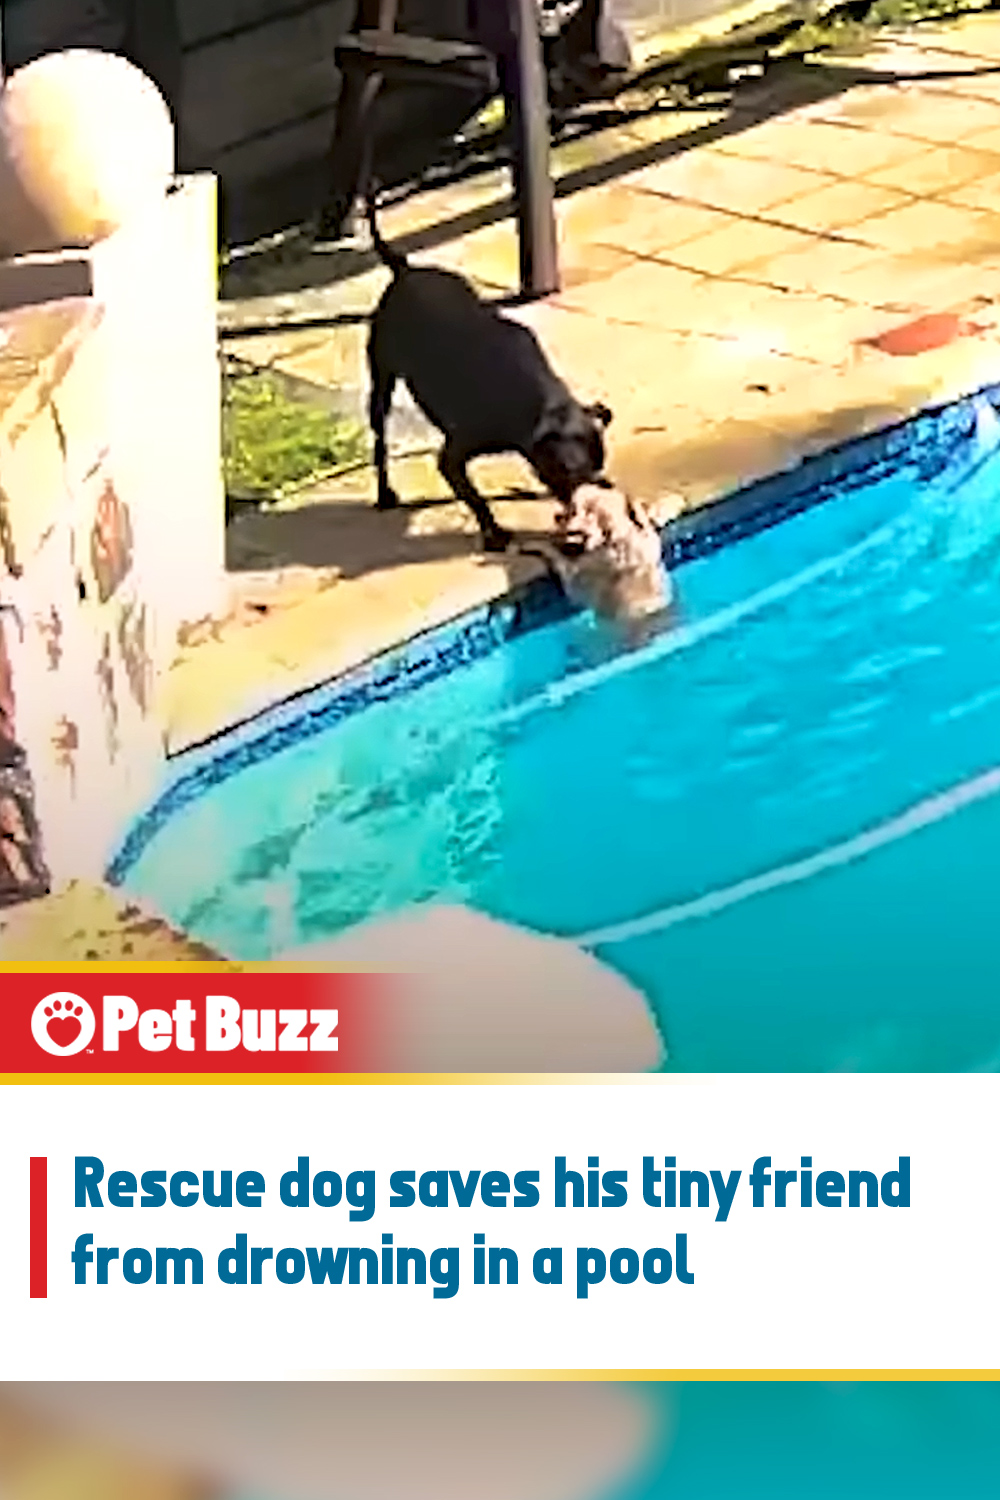 Rescue dog saves his tiny friend from drowning in a pool